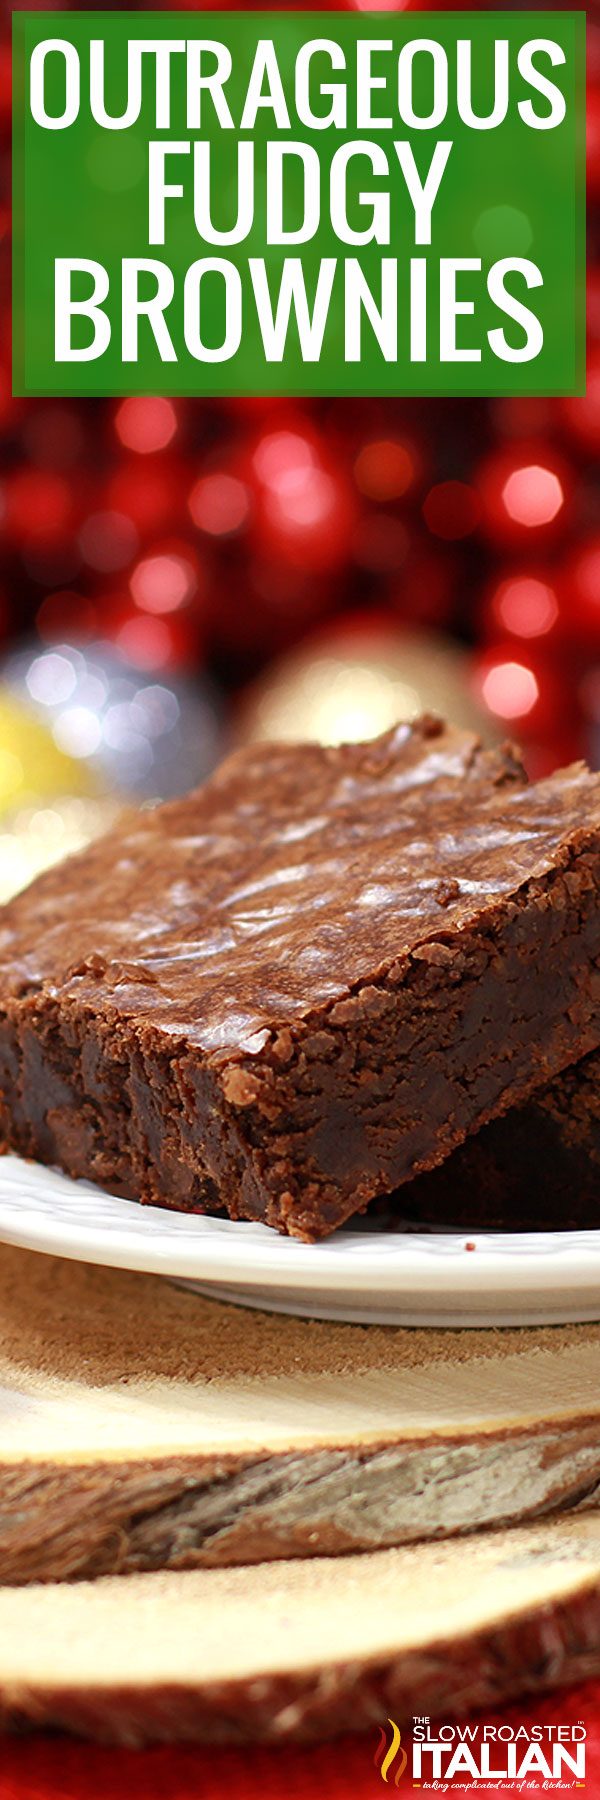 outrageous fudgy brownies